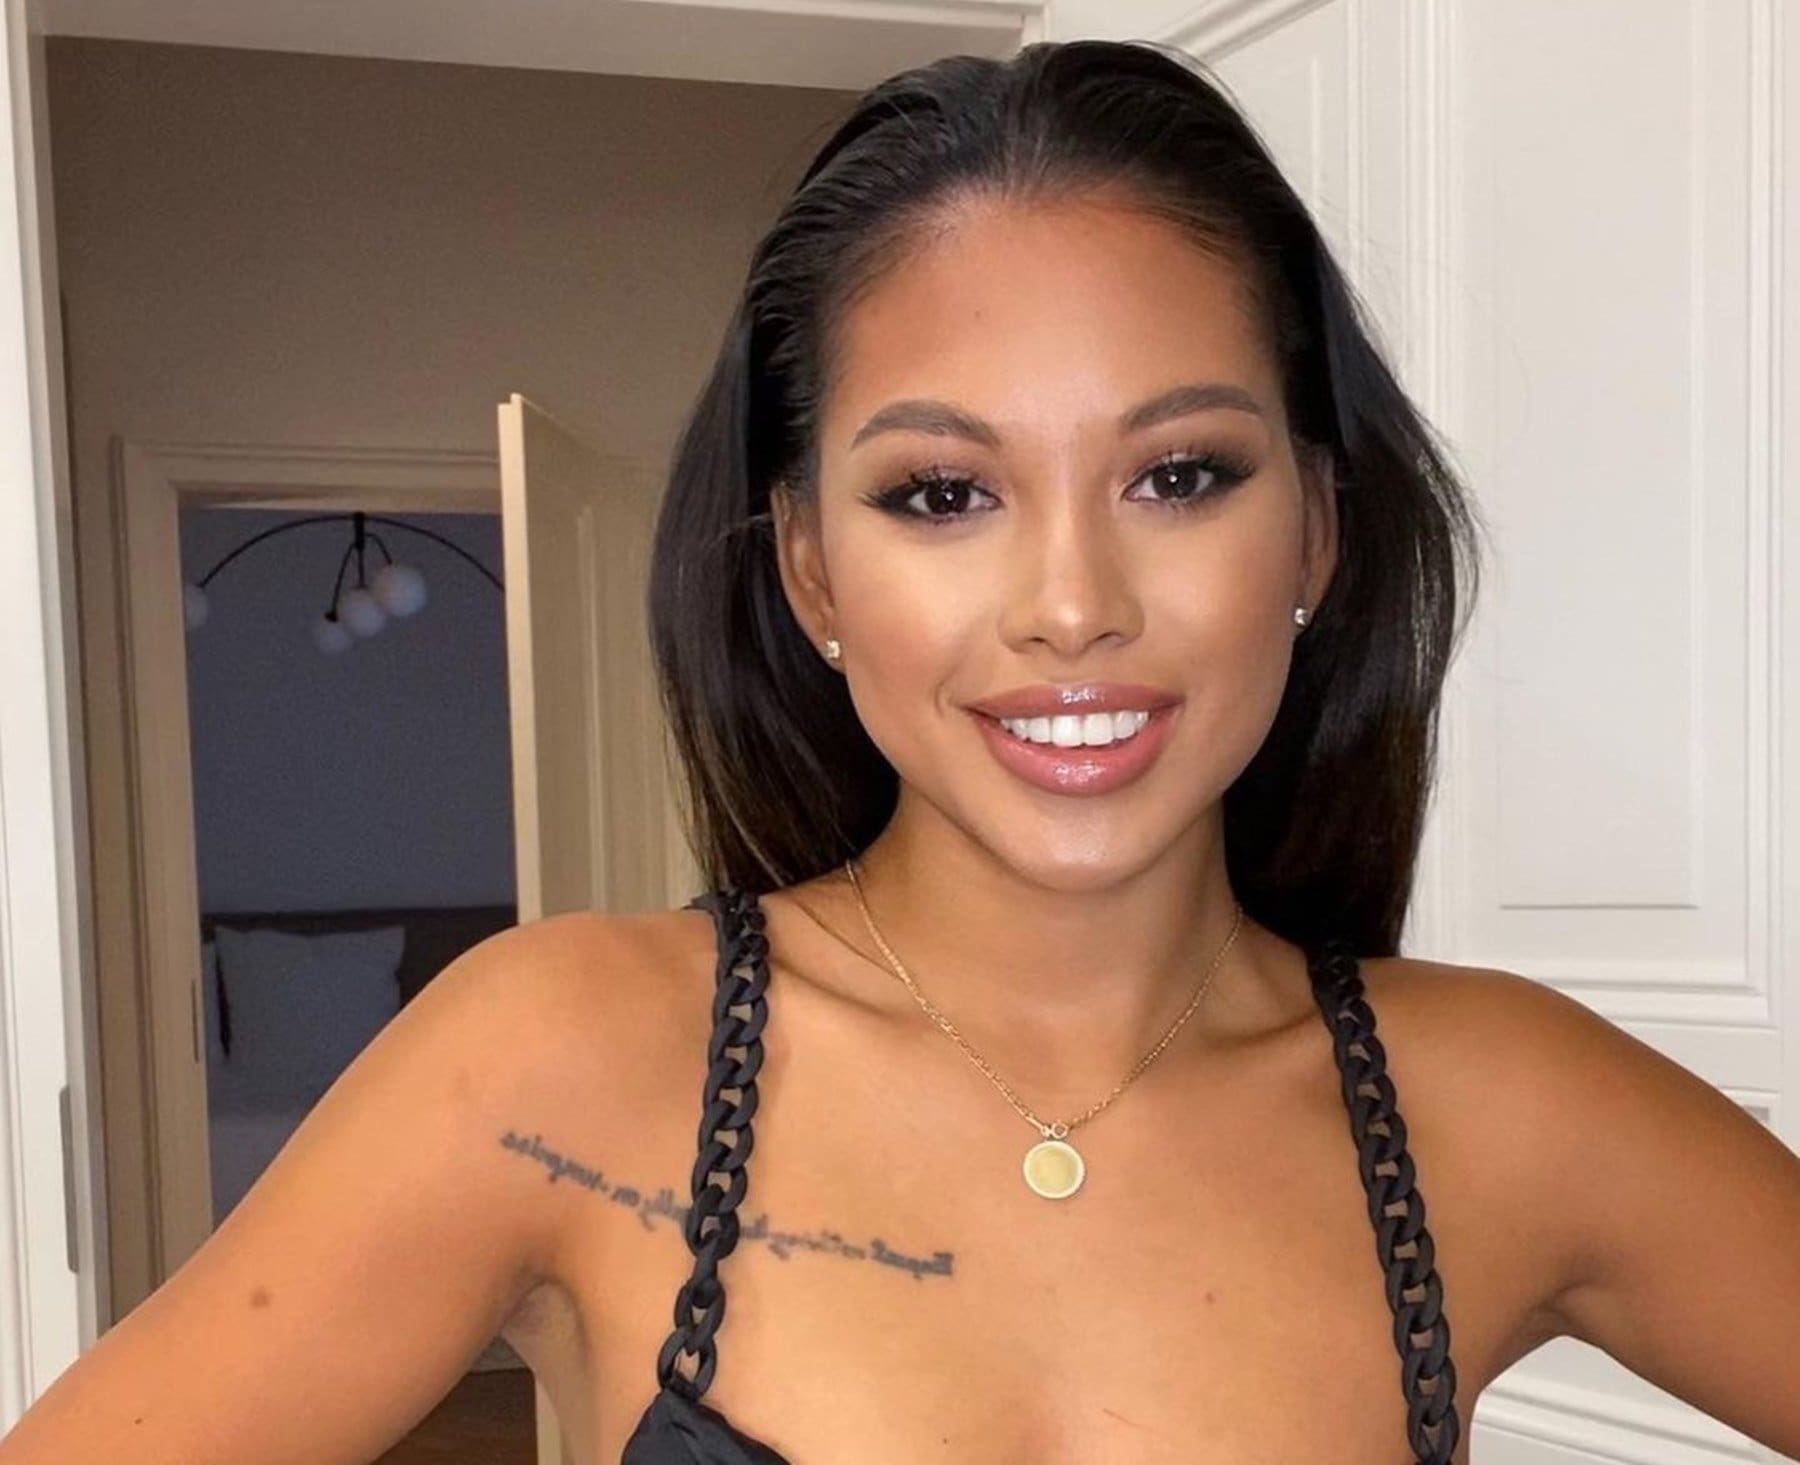 Chris Brown's Baby Mama, Ammika Harris Updates Fans With New Clips Featuring Herself And Baby Aeko!